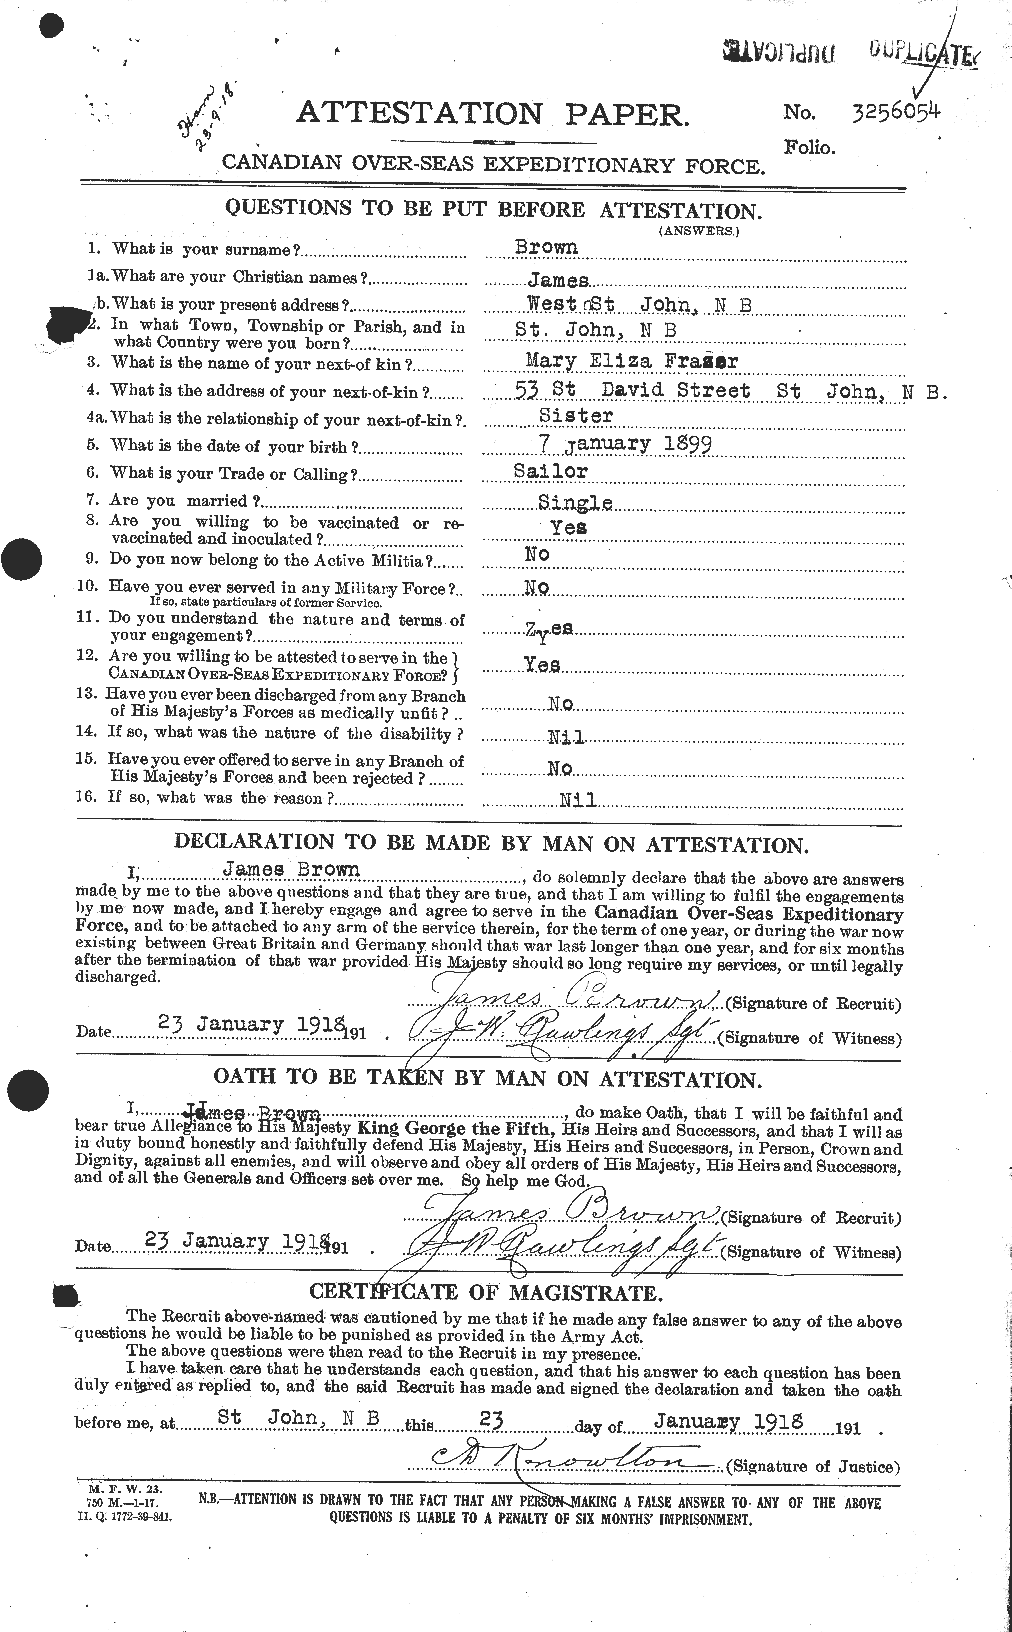 Personnel Records of the First World War - CEF 265777a